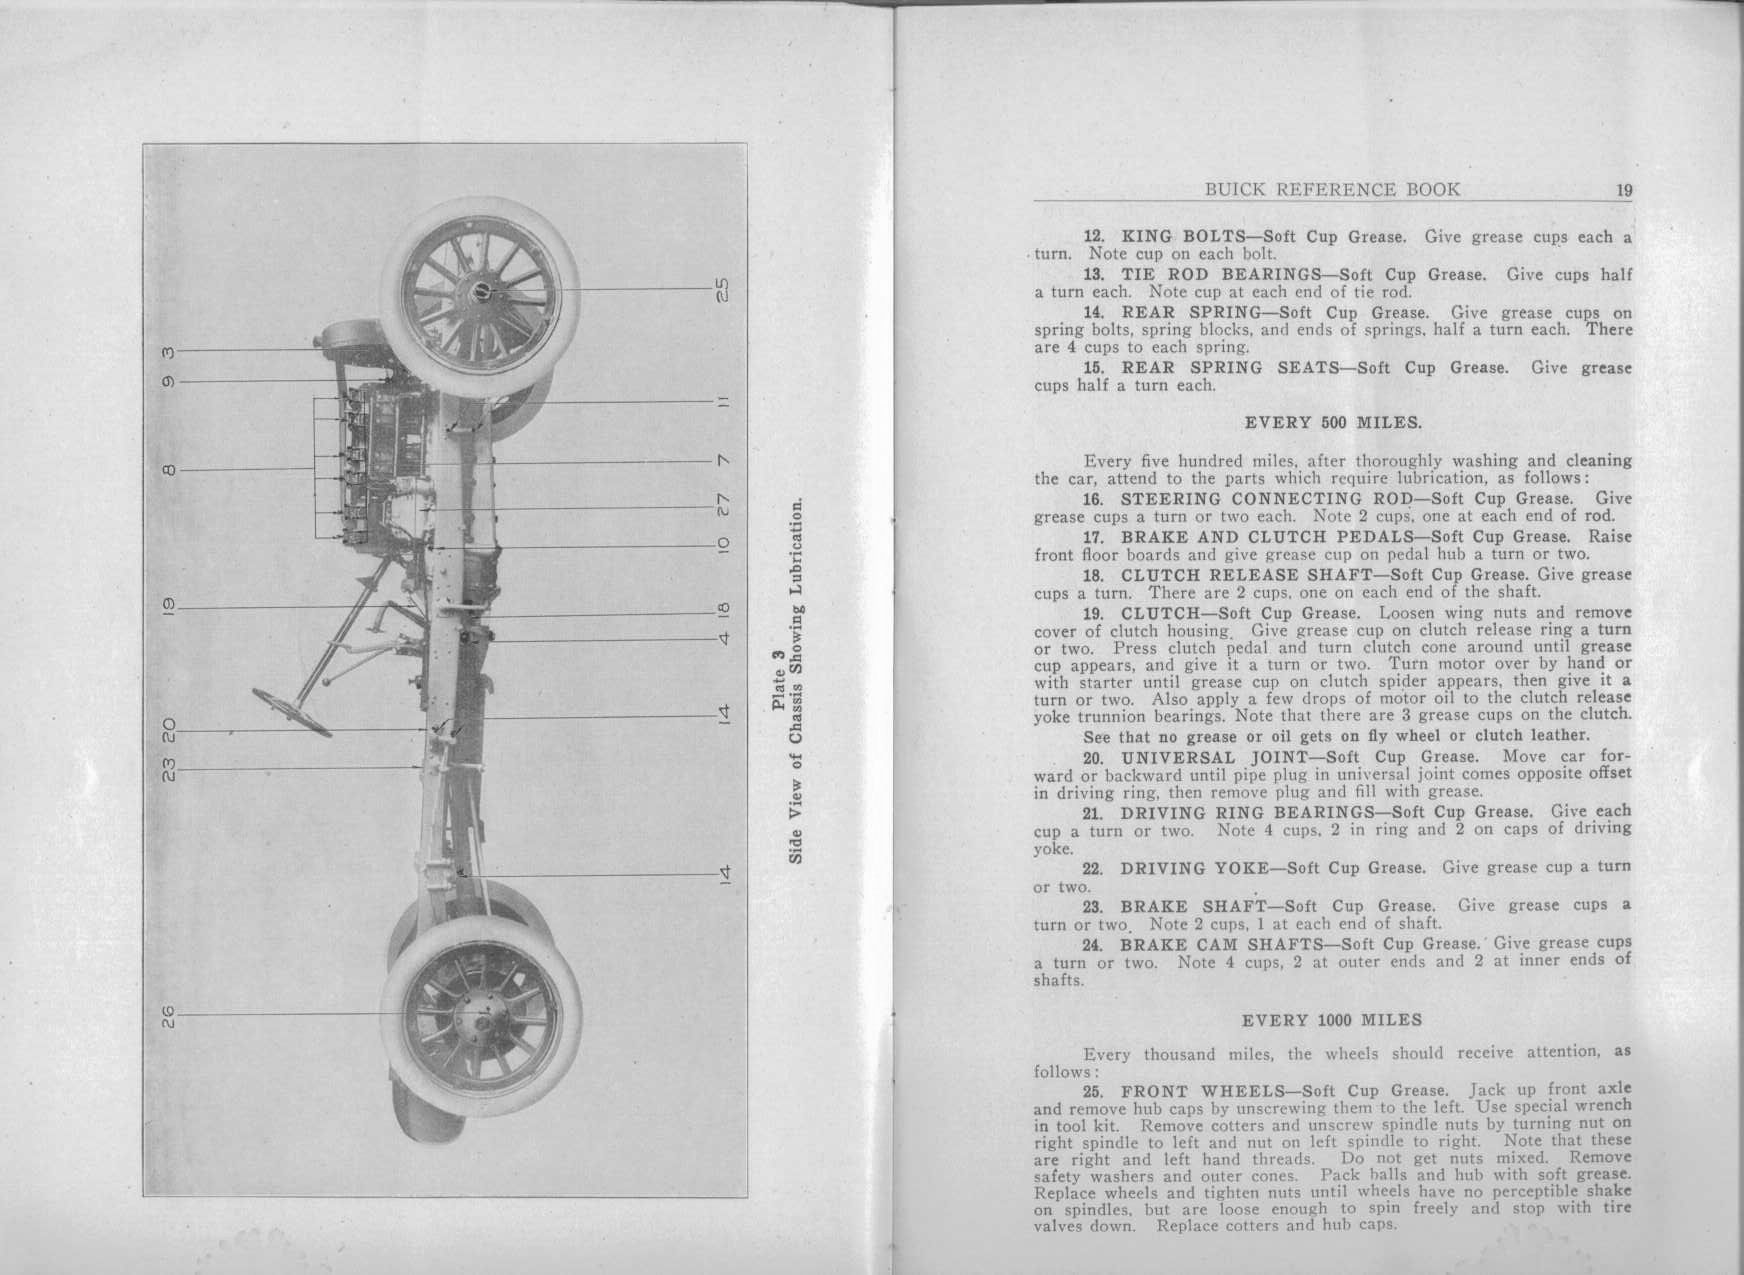 1916 Buick Reference Book-18-19